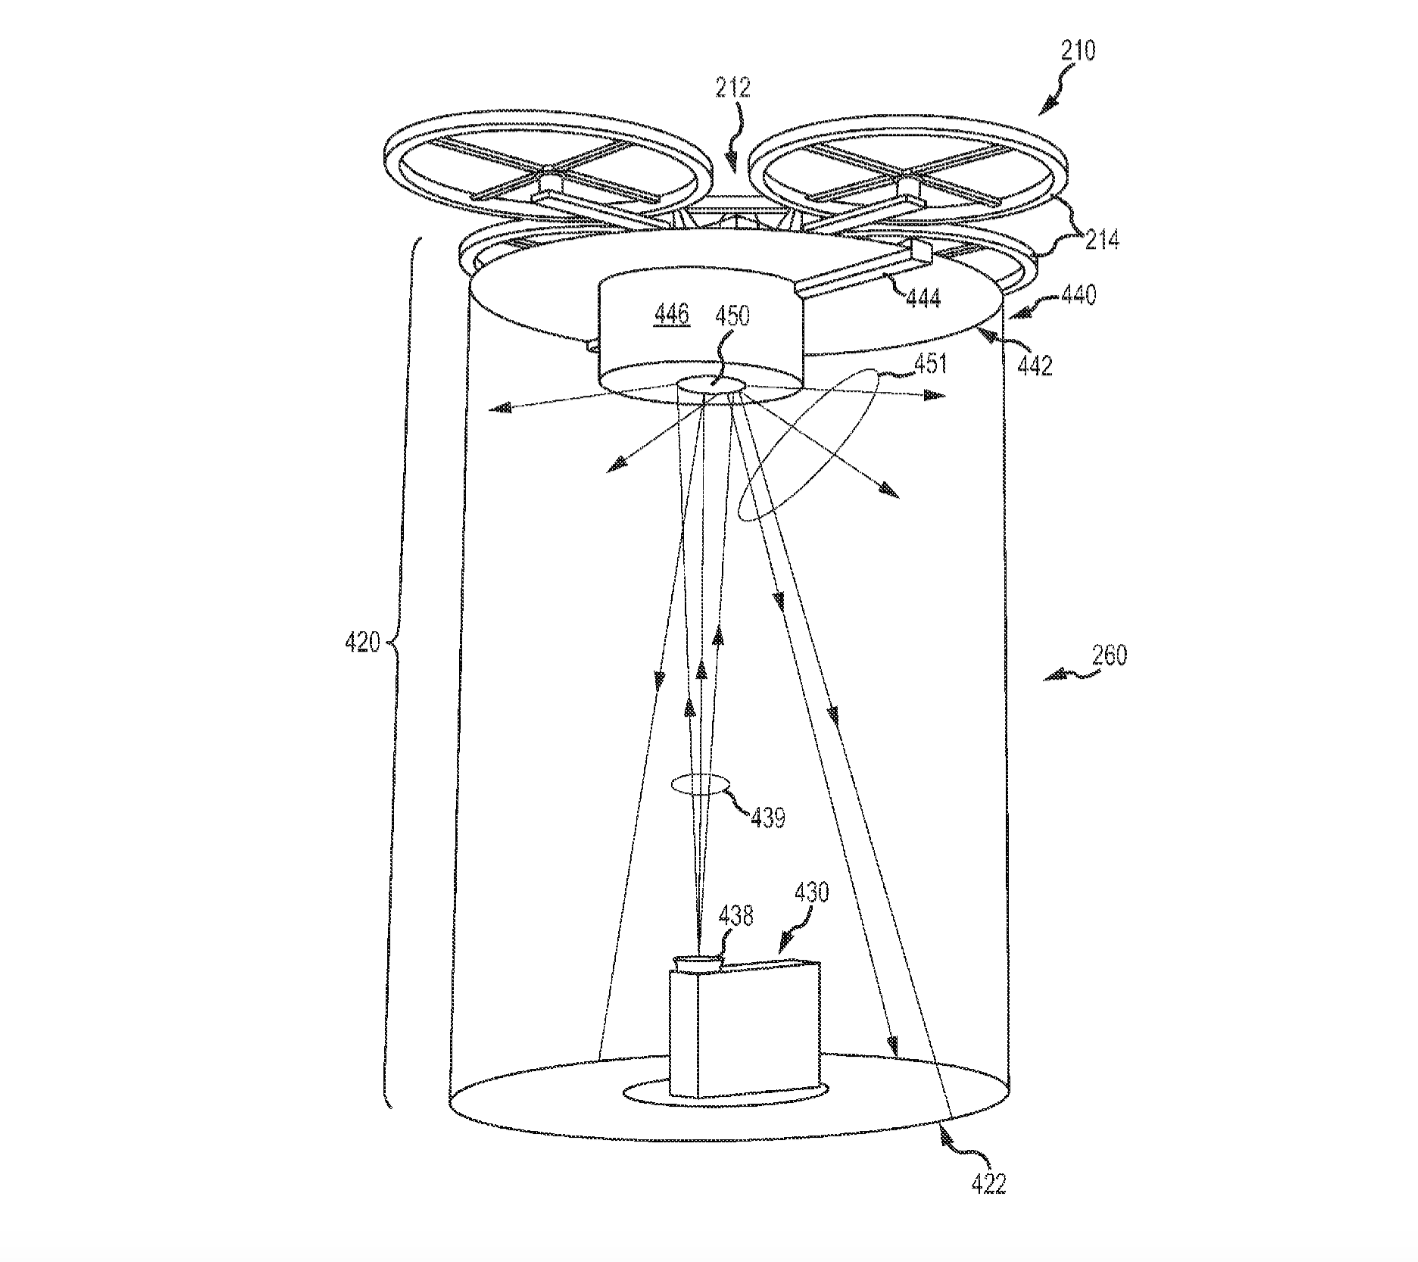 Disney files for patent for projector to work with drones